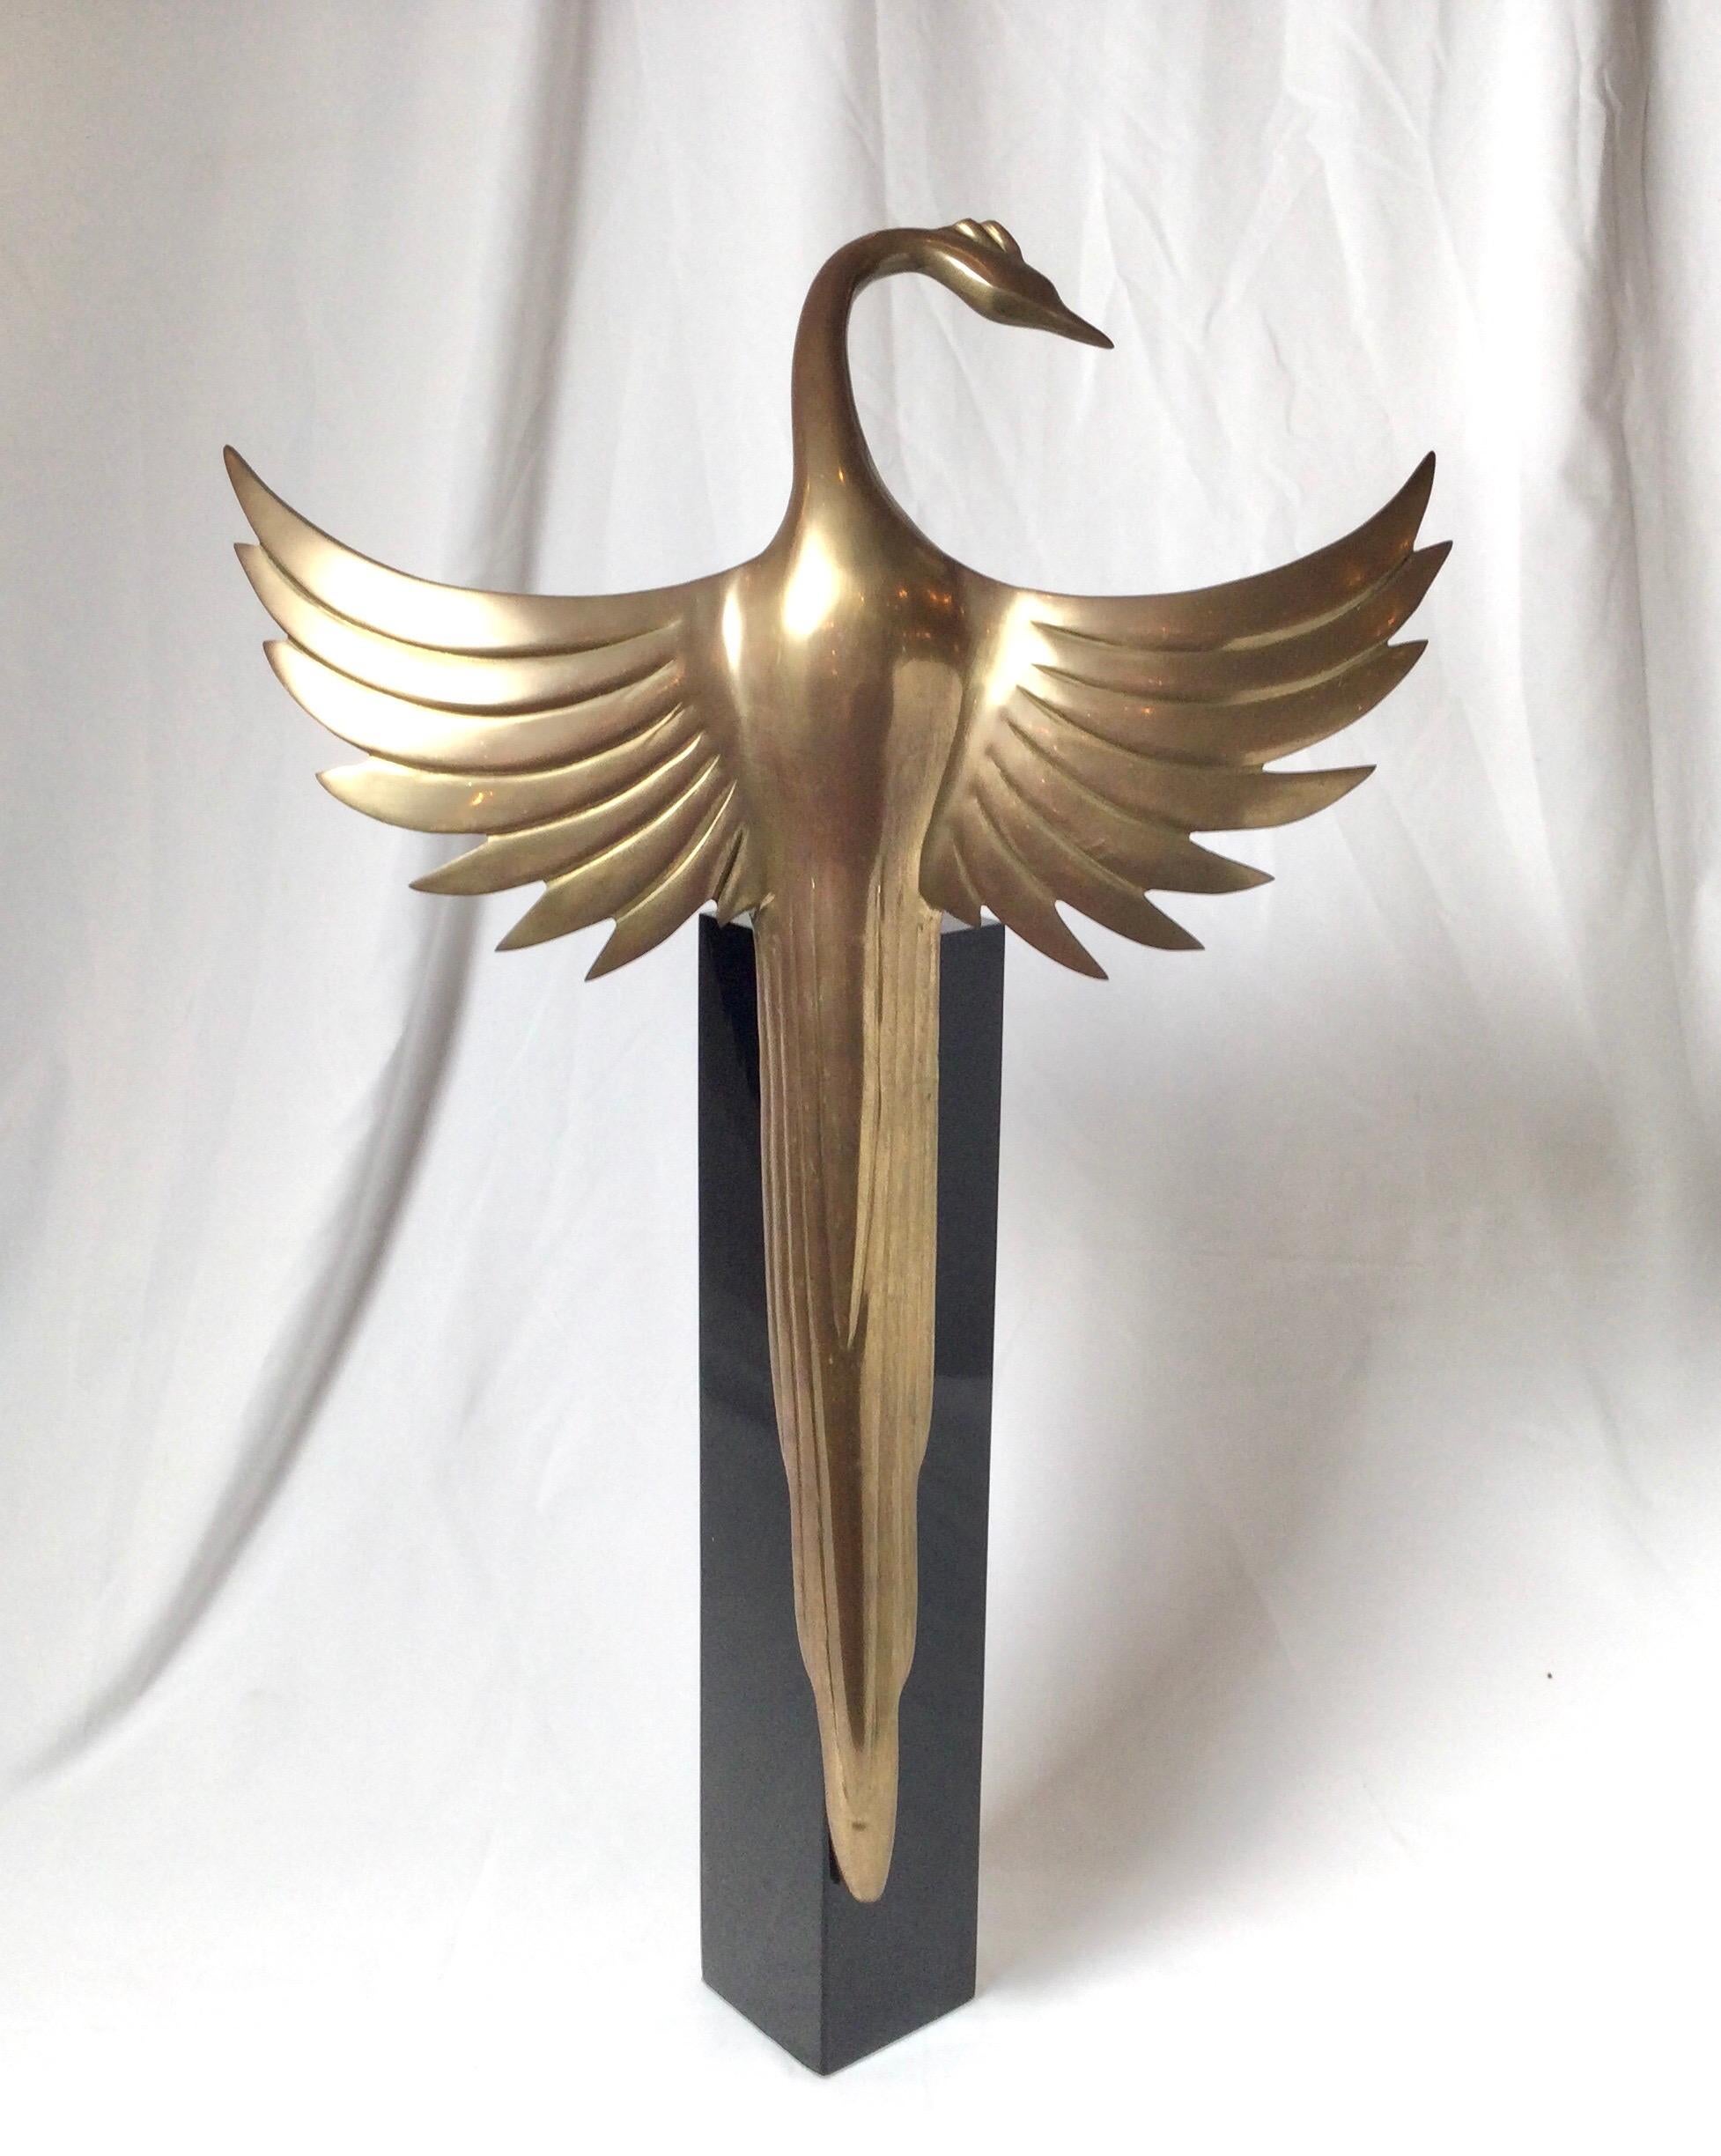 Art Deco styled brass bird sculpture with black enameled metal base. The tall square base with bird resting with wings expanded.